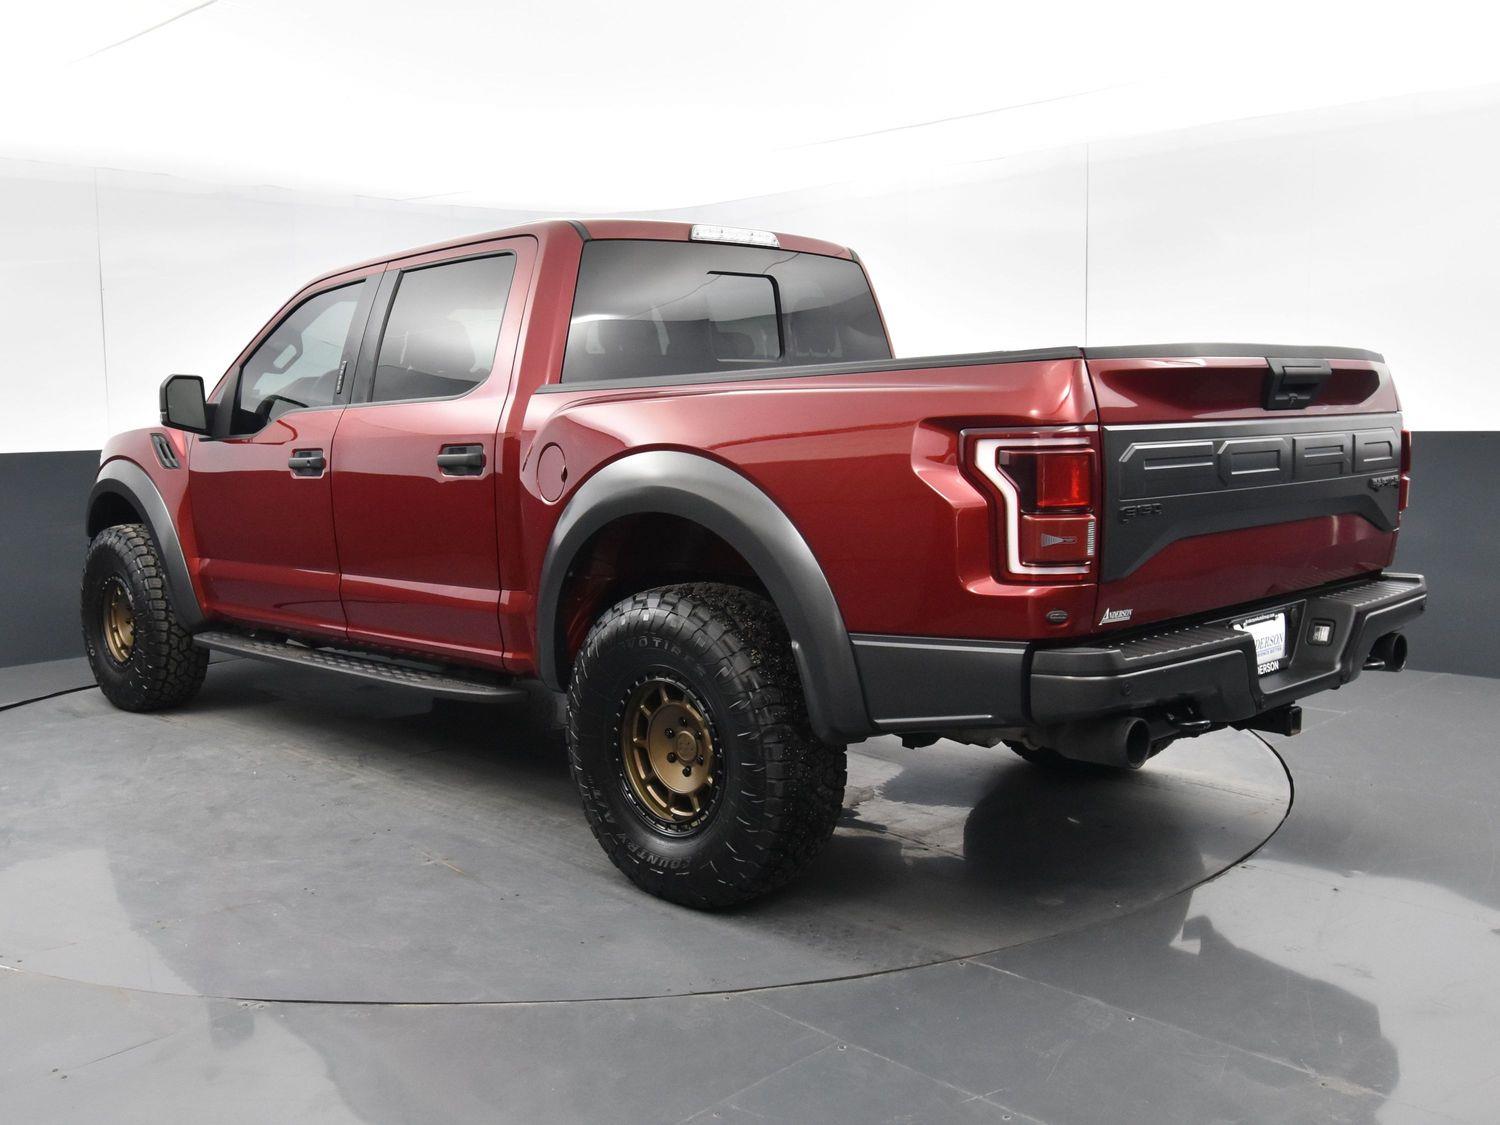 Used 2017 Ford F-150 Raptor Crew Cab Truck for sale in Grand Island NE